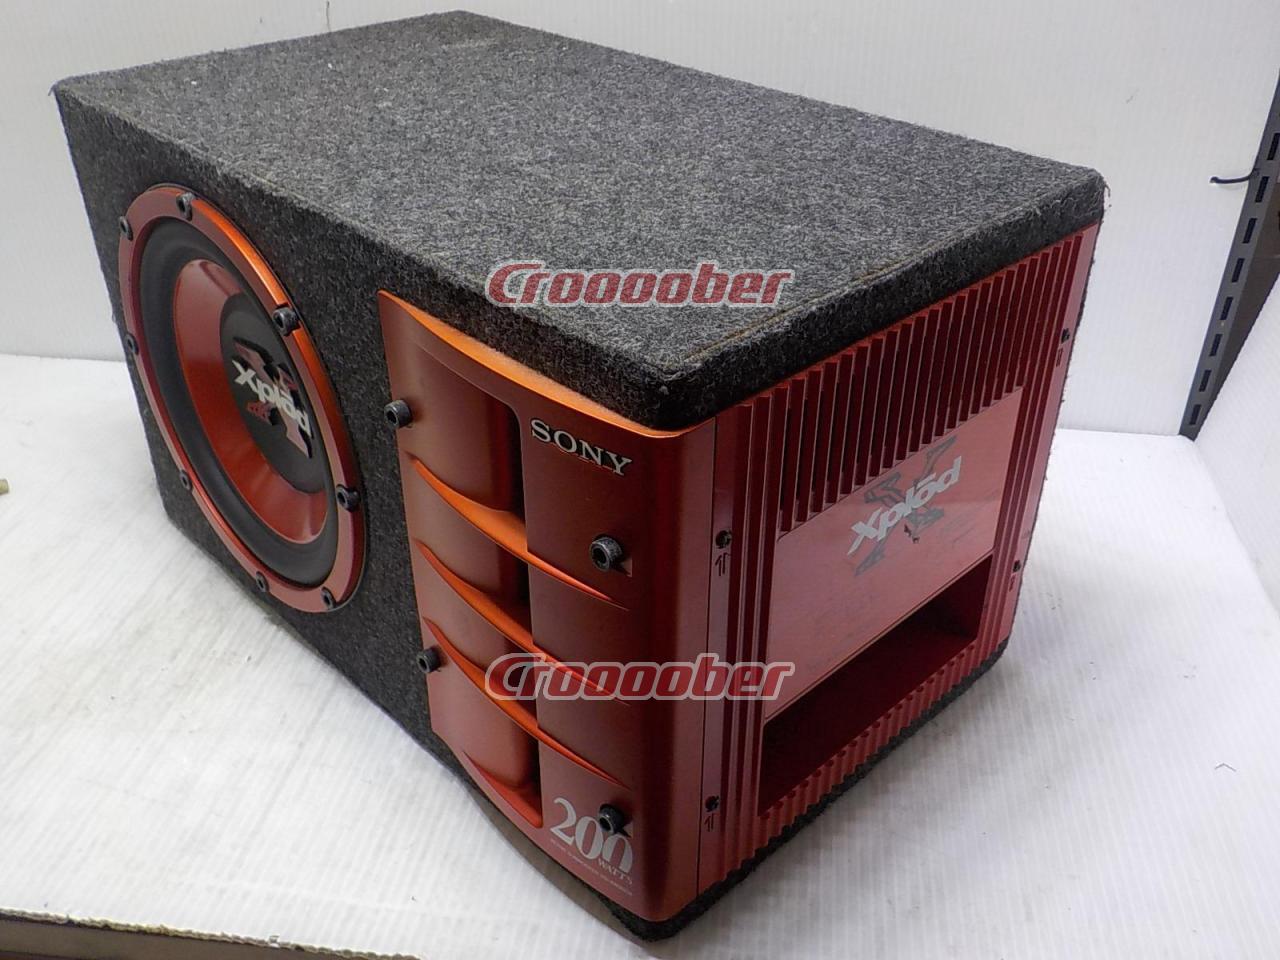 SONY XS-AW200X | Built in AMP Sub Woofer Speakers | Croooober